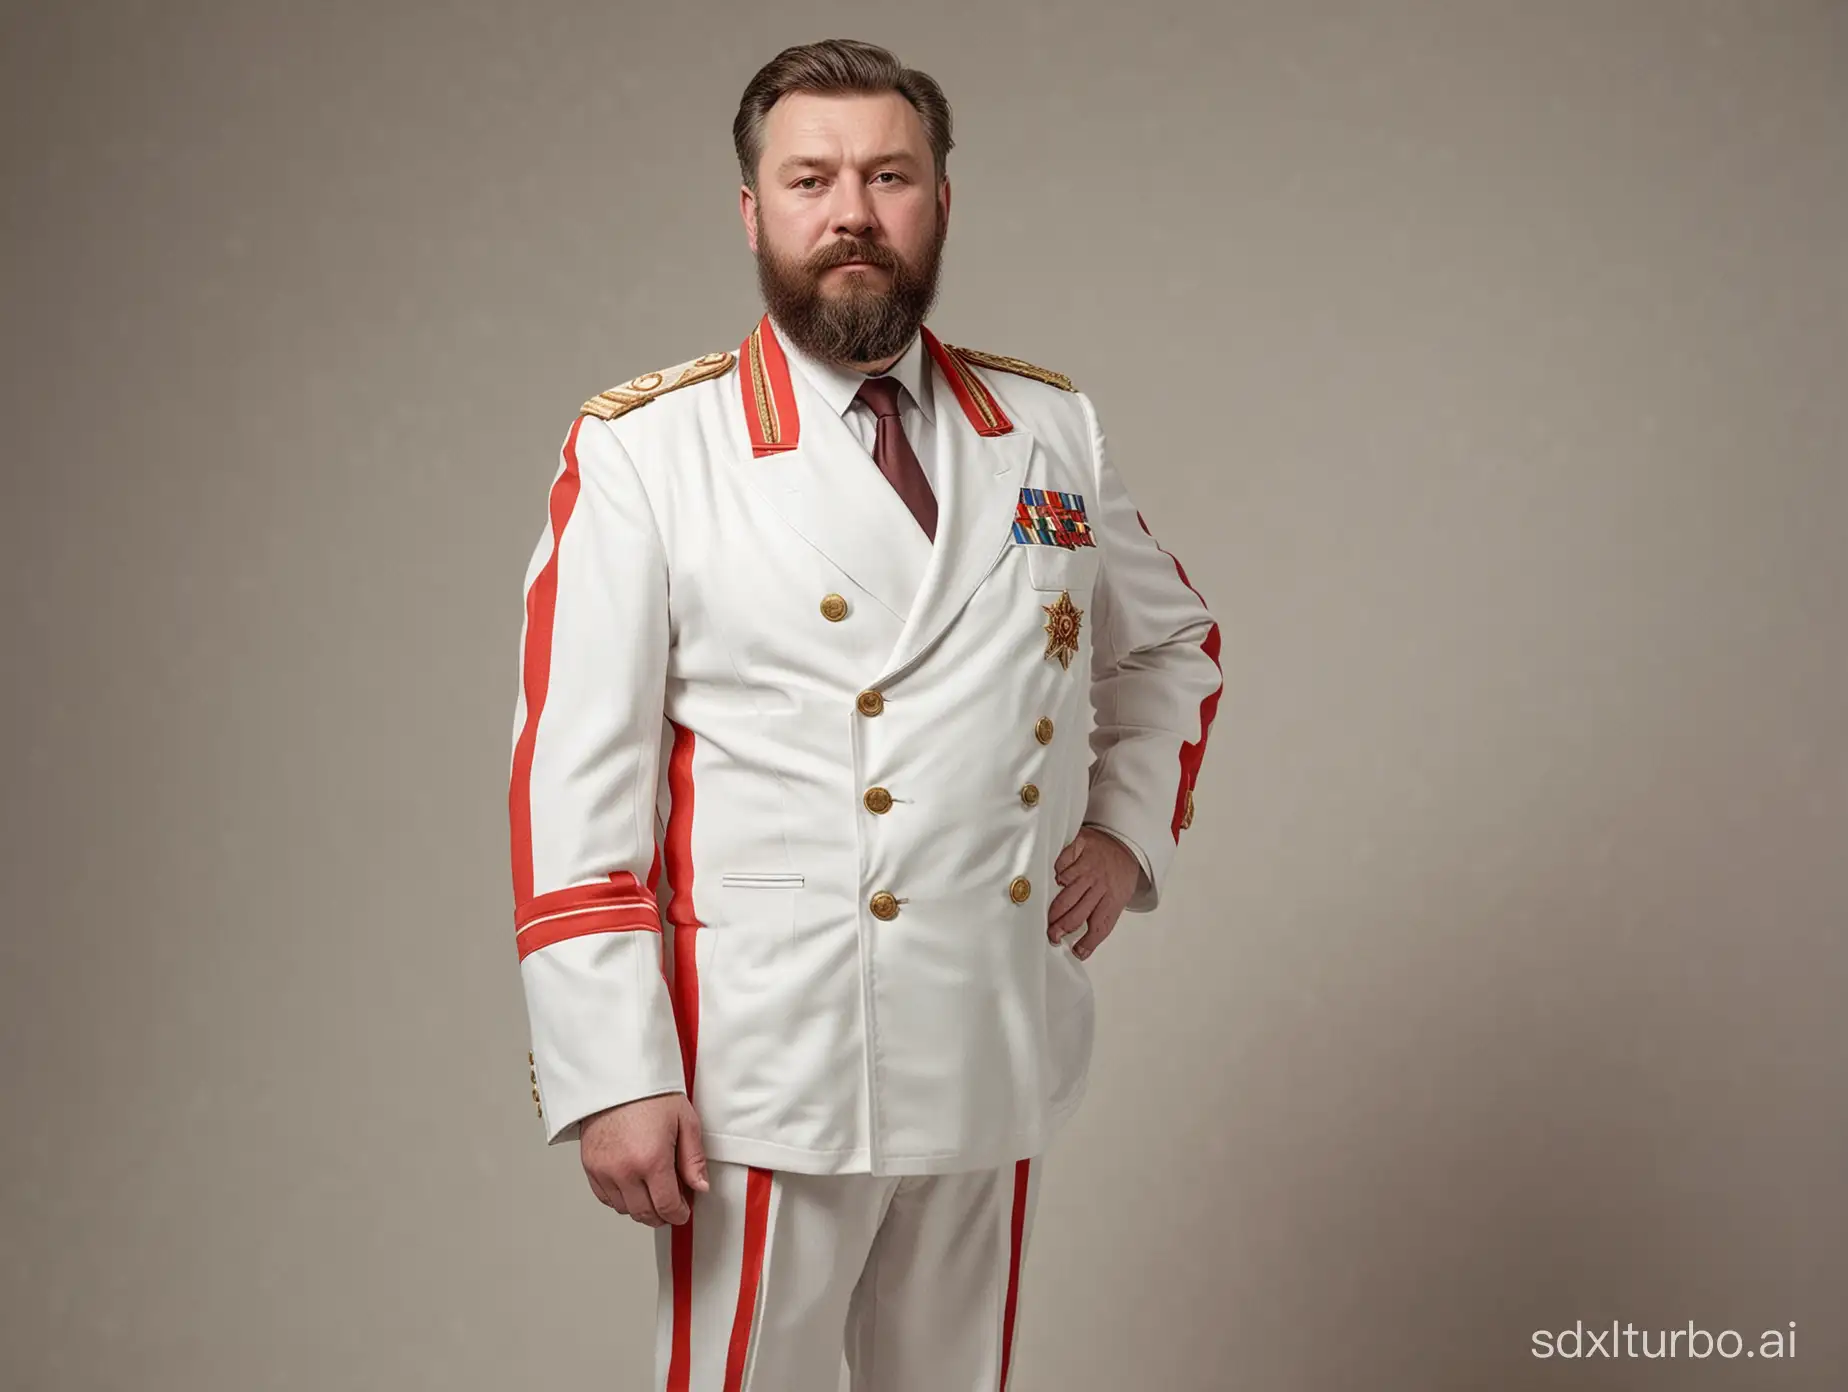 Soviet-Leader-in-White-Suit-with-Red-Stripes-Portrait-of-a-Chubby-Caucasian-Leader